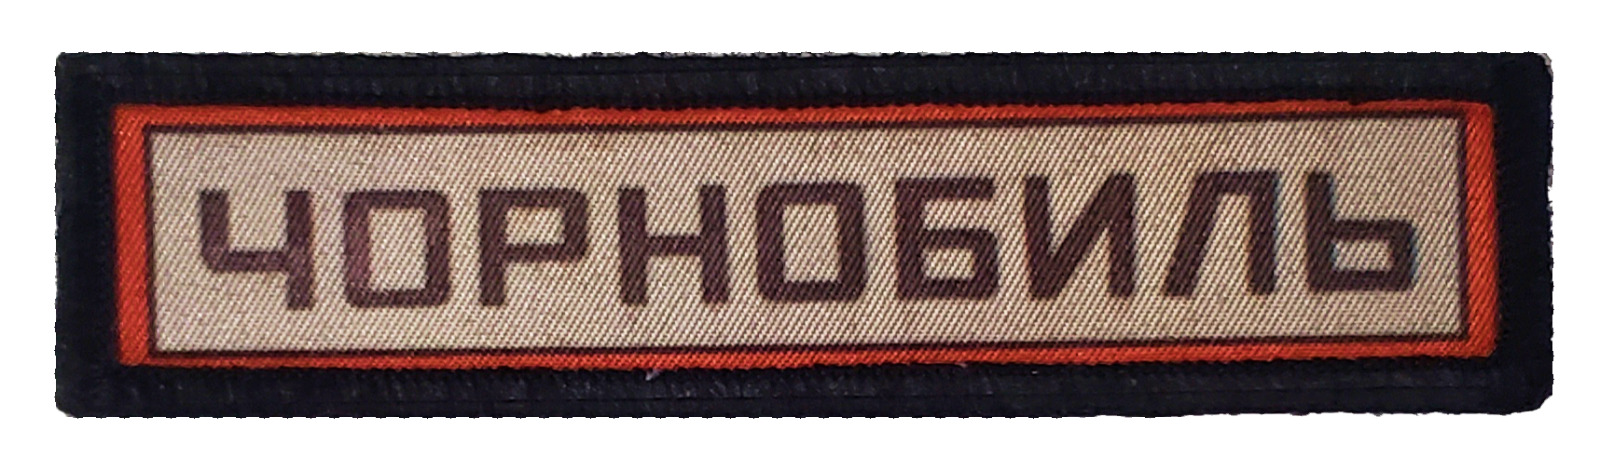 1x4 Chernobyl Russian Sign Morale Patch Tactical Army Military Hook Flag